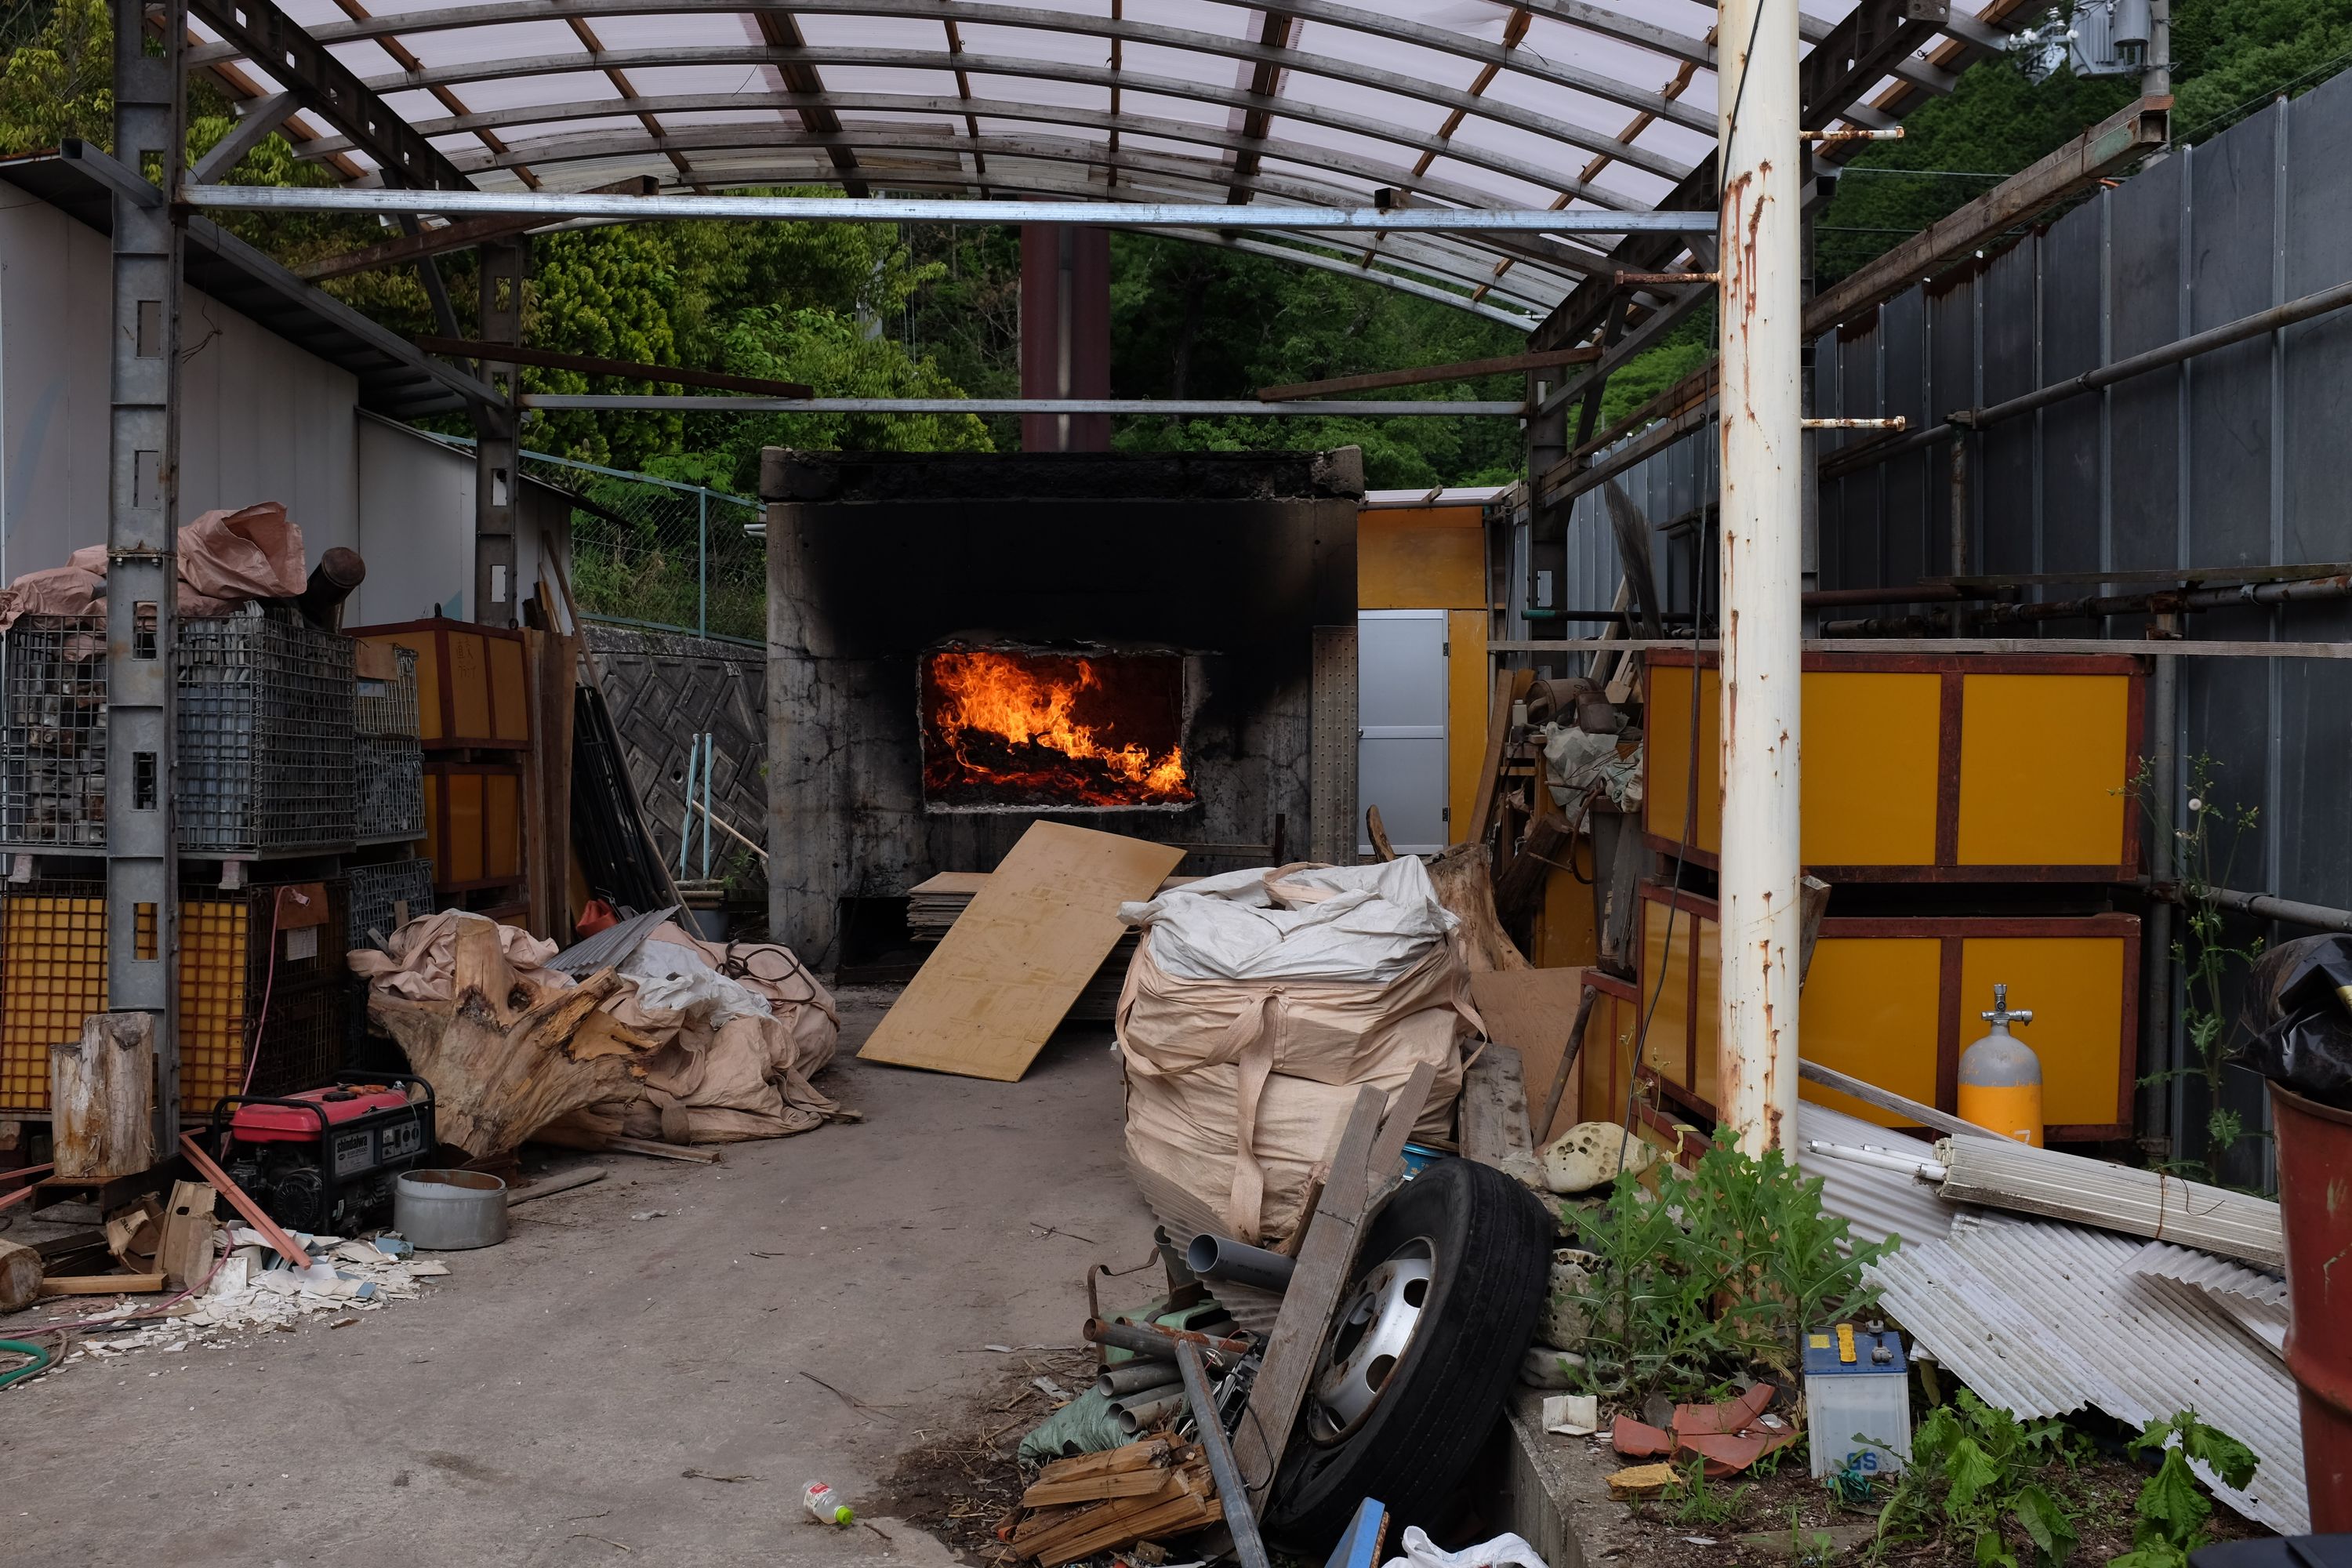 A huge trash fire burns in a furnace on a yard heaped with various piles of trash.